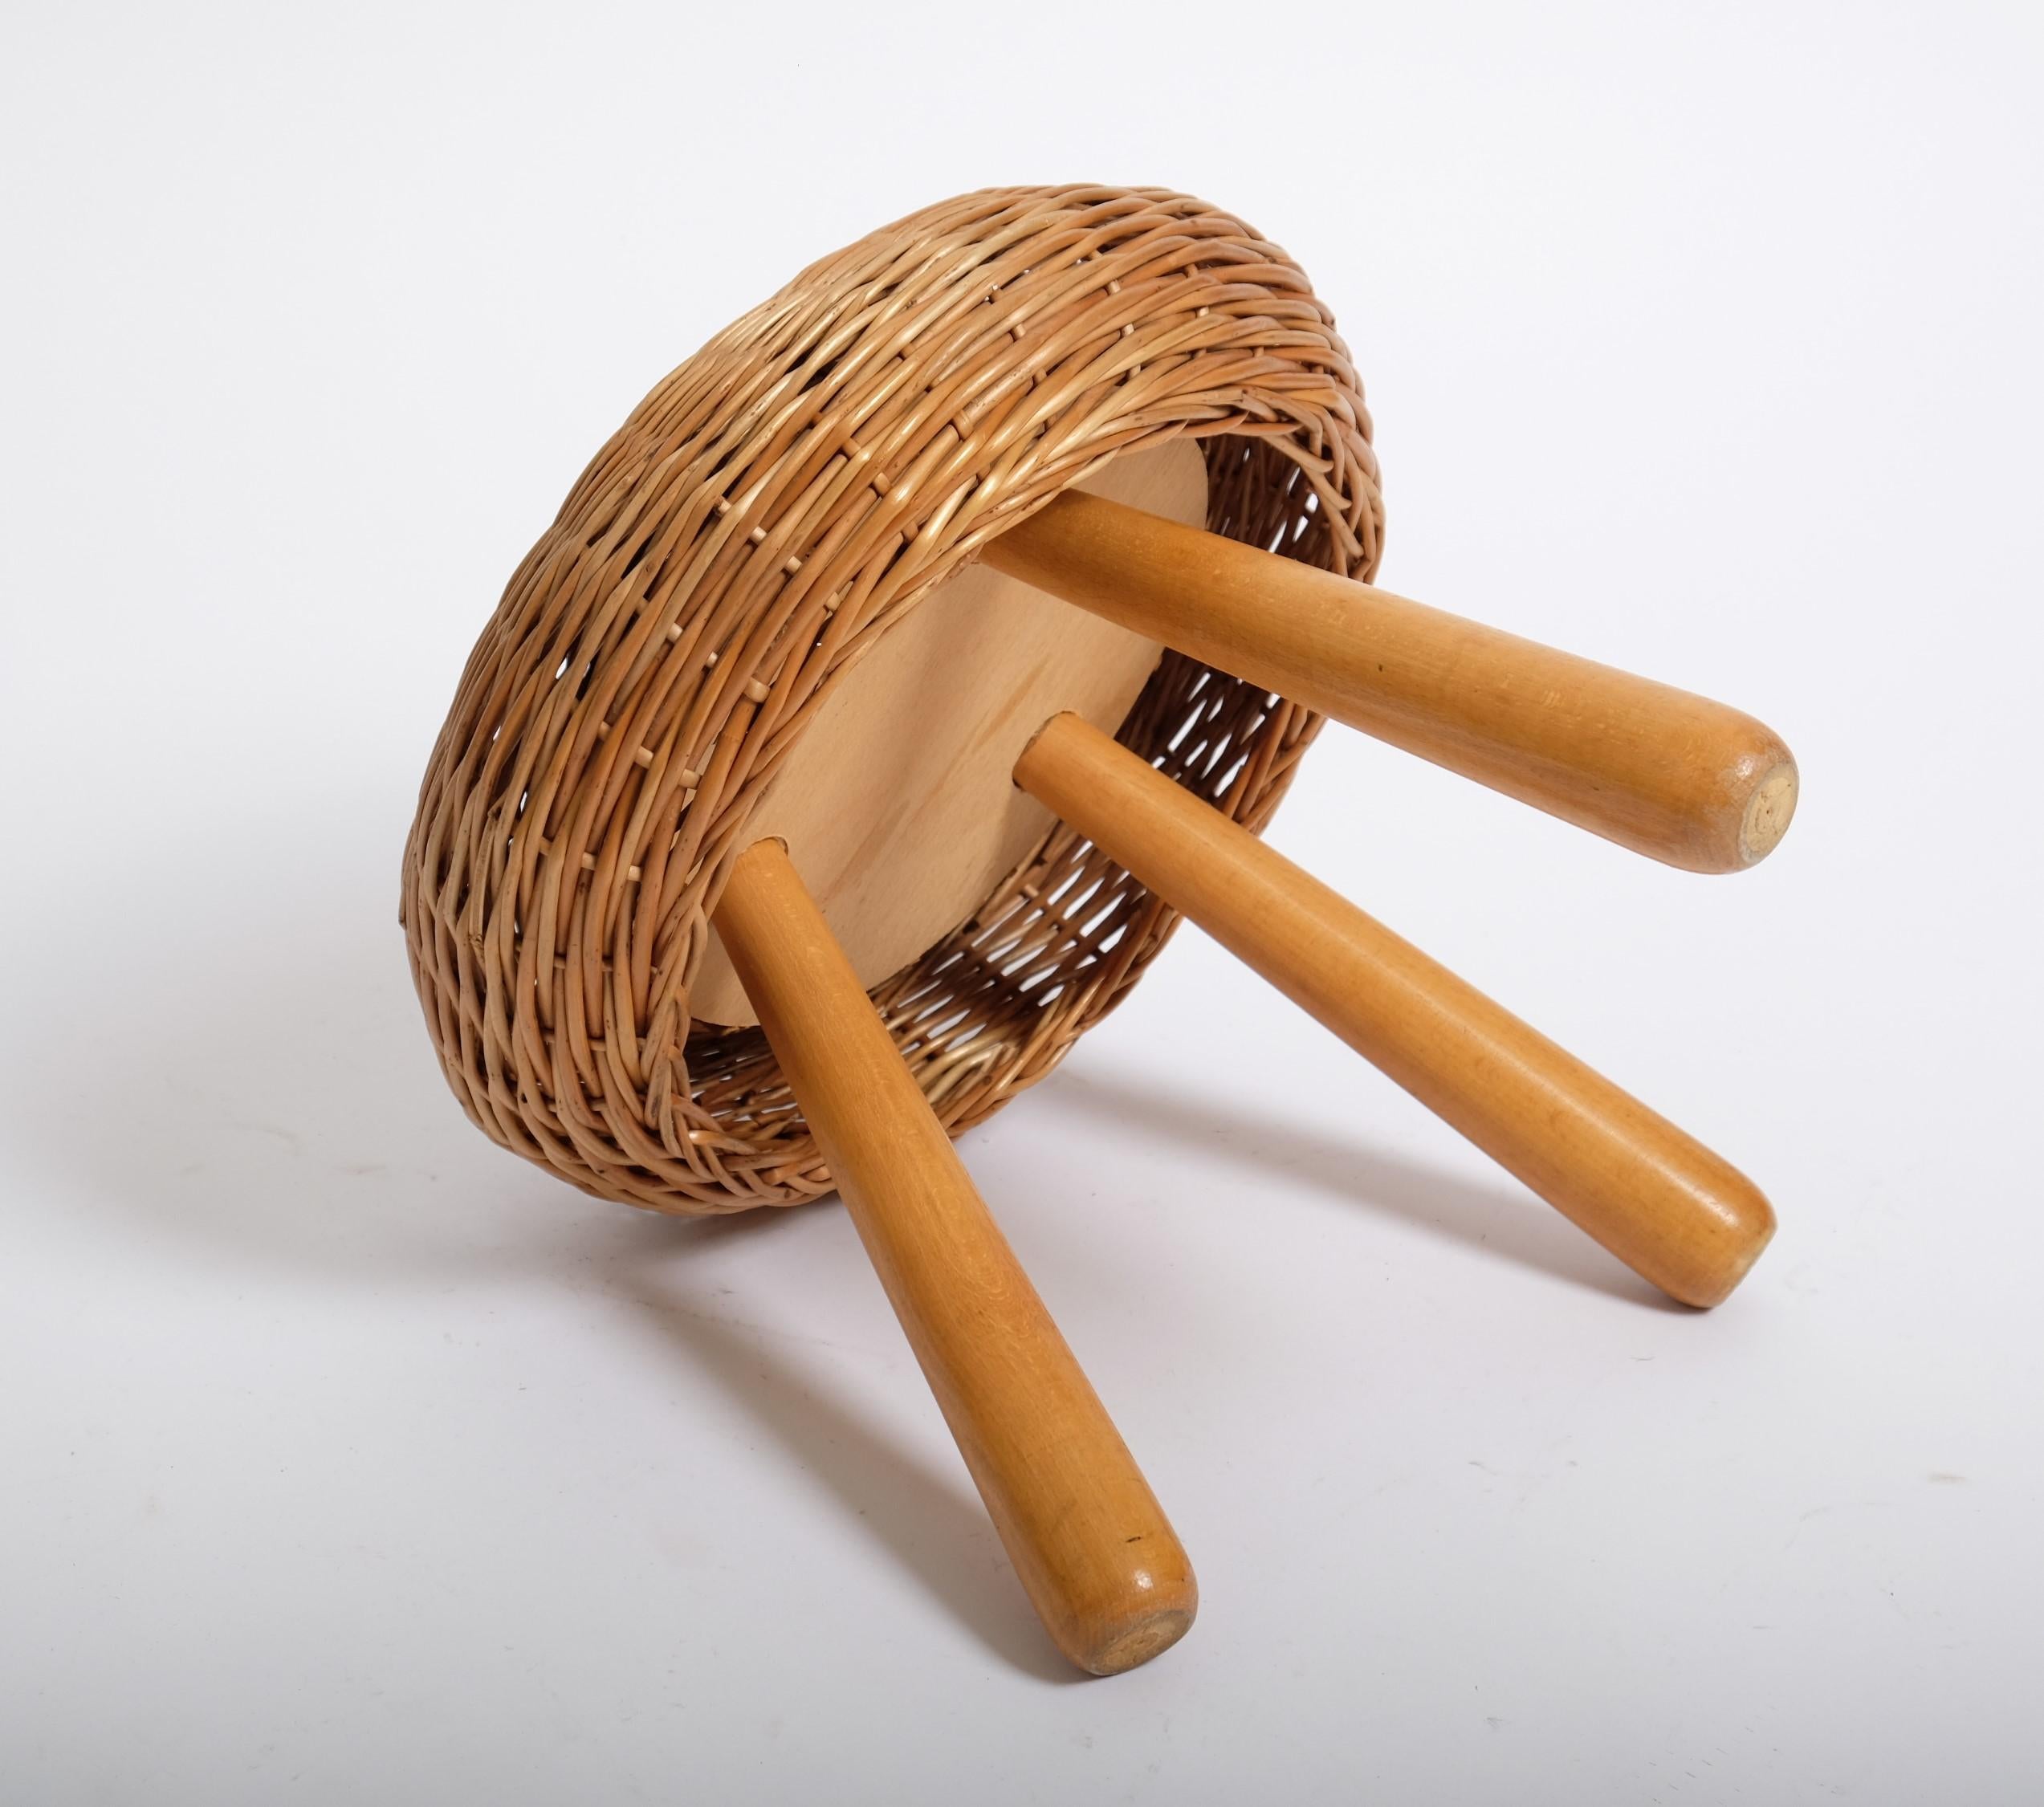 Tony Paul 'Attributed' Stool Wicker Wood, United States 1950s For Sale 10